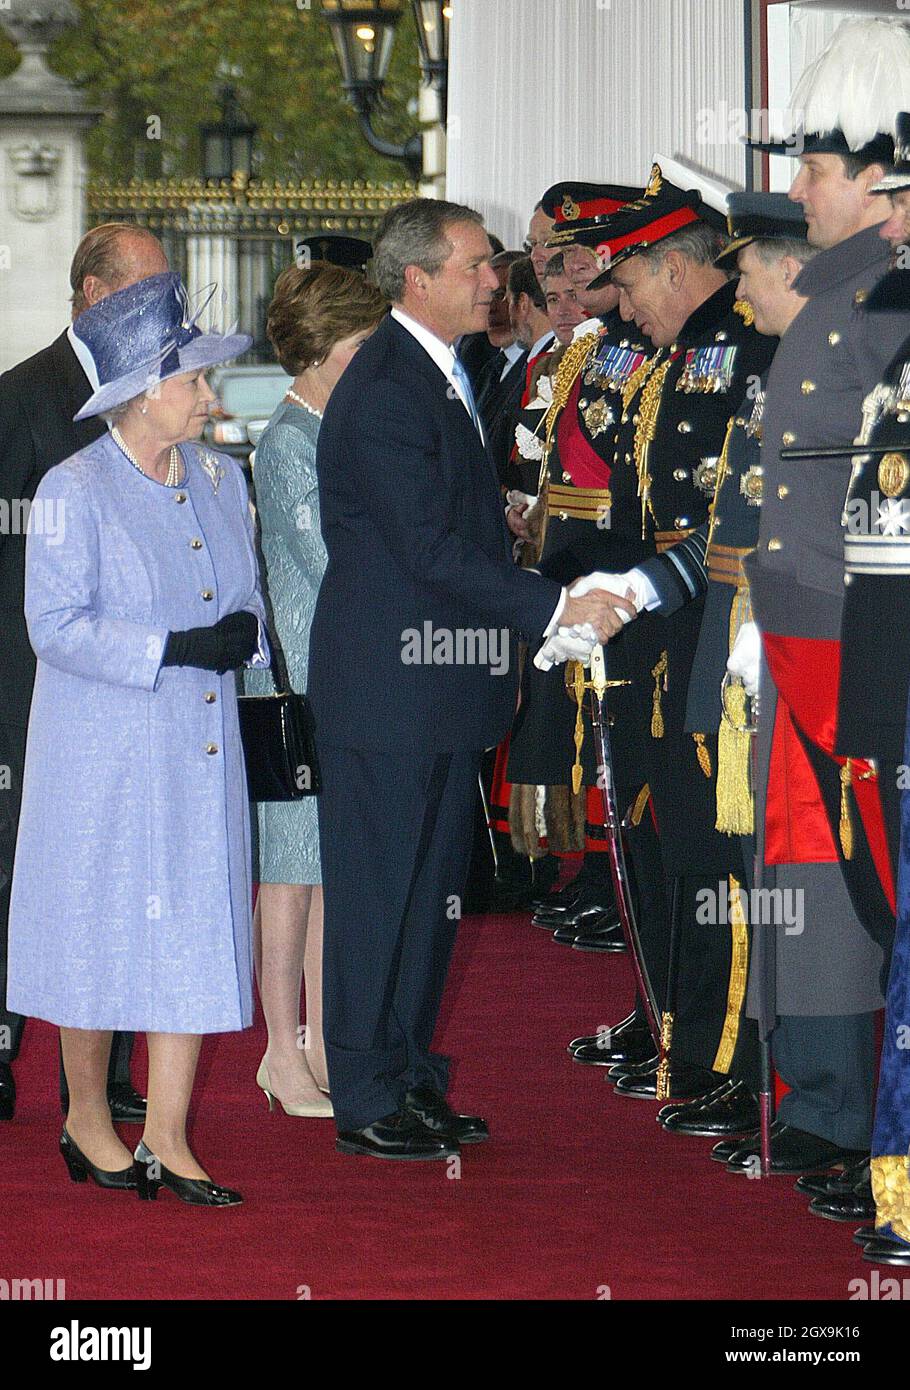 US president George Bush and his wife Laura are welcomed by The Queen and The Duke of Edinburgh to Buckingham Palace at the start of his state visit to Britain. Â©Anwar Hussein/allactiondigital.com    Stock Photo